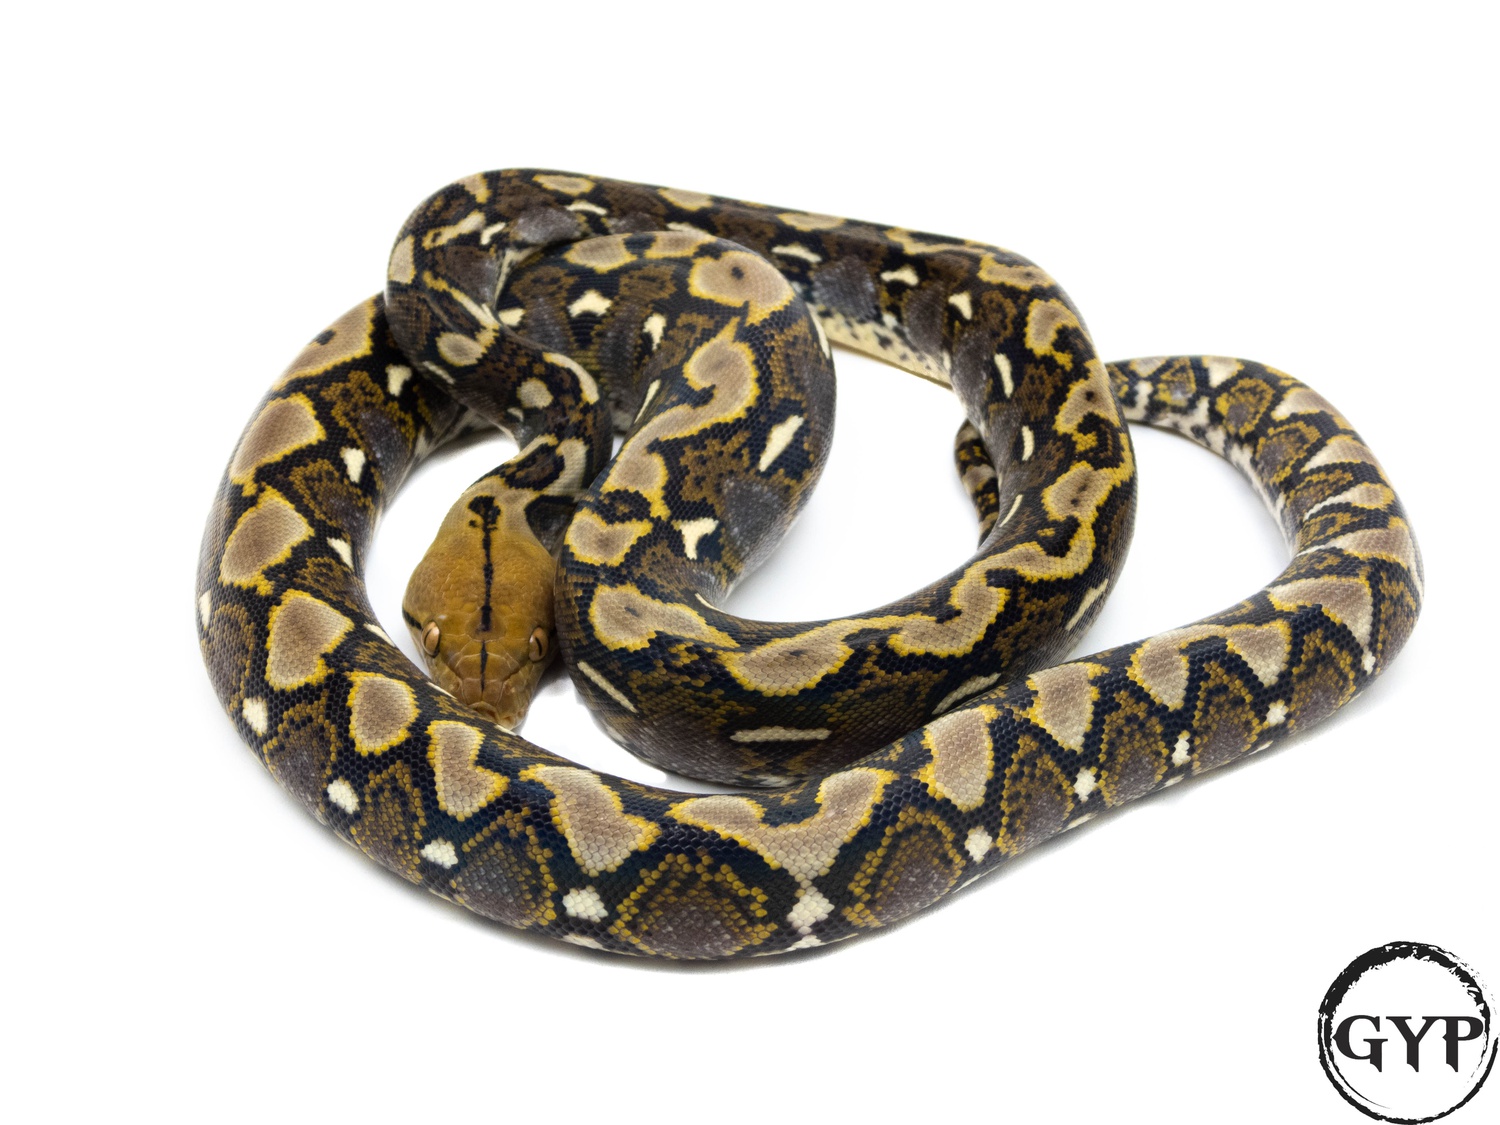 Sulawesi/Java Cross Reticulated Python by Gopher Your Pet